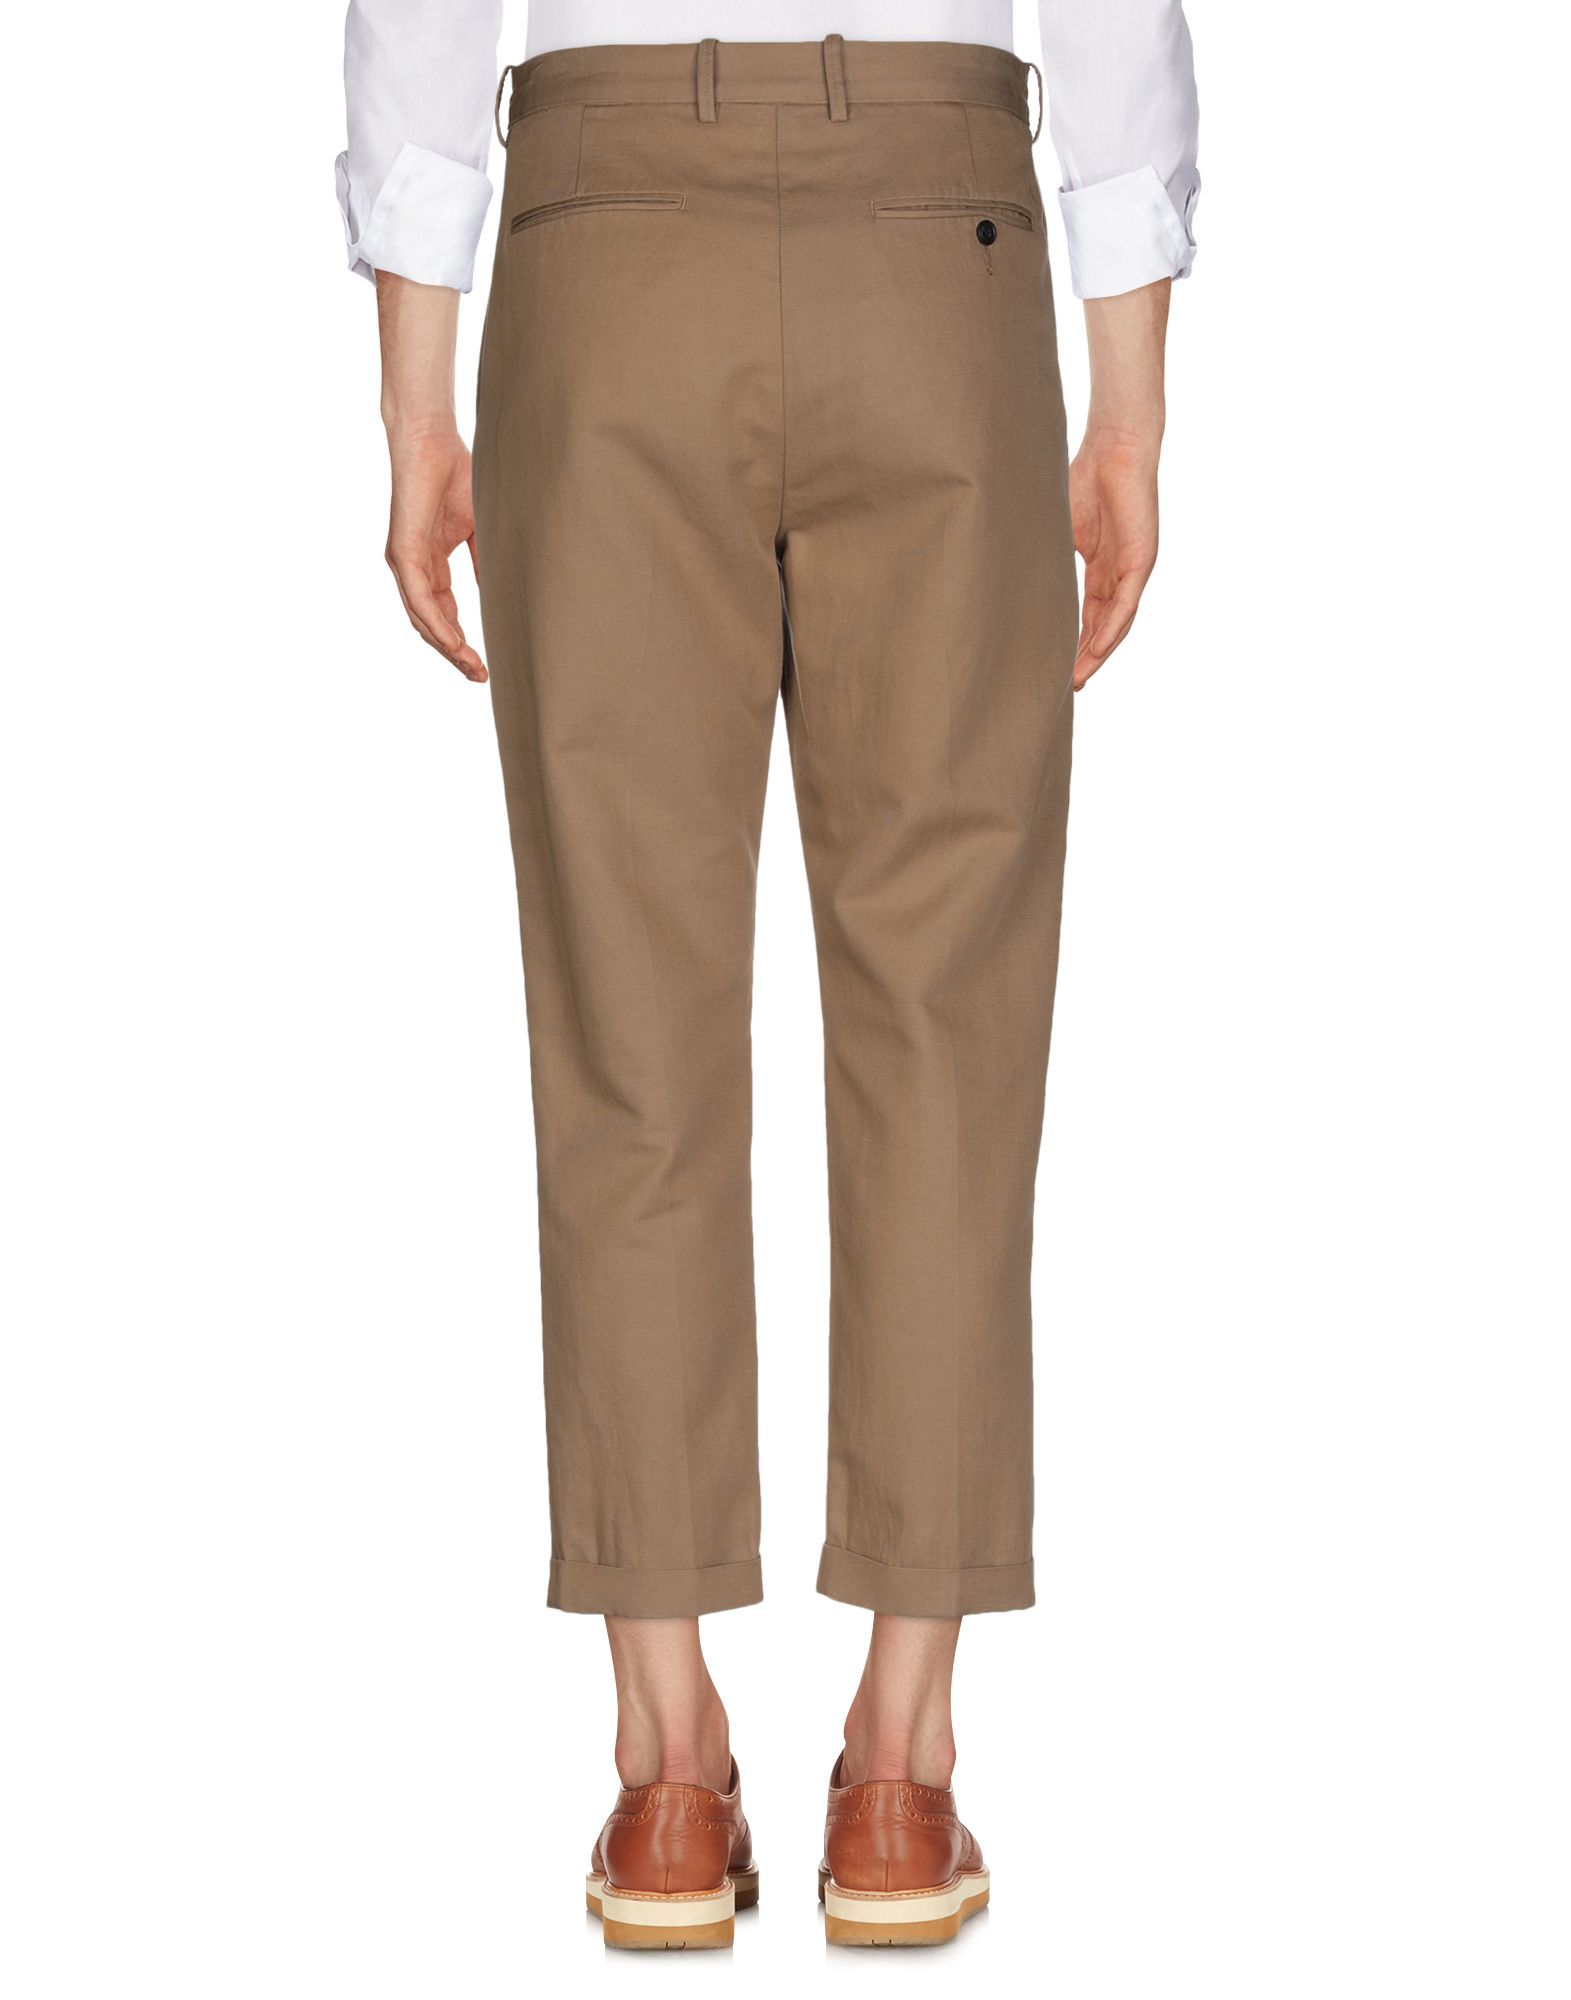 Twill<br>No appliqués<br>Basic solid colour<br>High waisted<br>Slim fit<br>Tapered leg<br>Hook-and-bar, zip<br>Multipockets<br>Cuffed hems<br>Chinos<br>